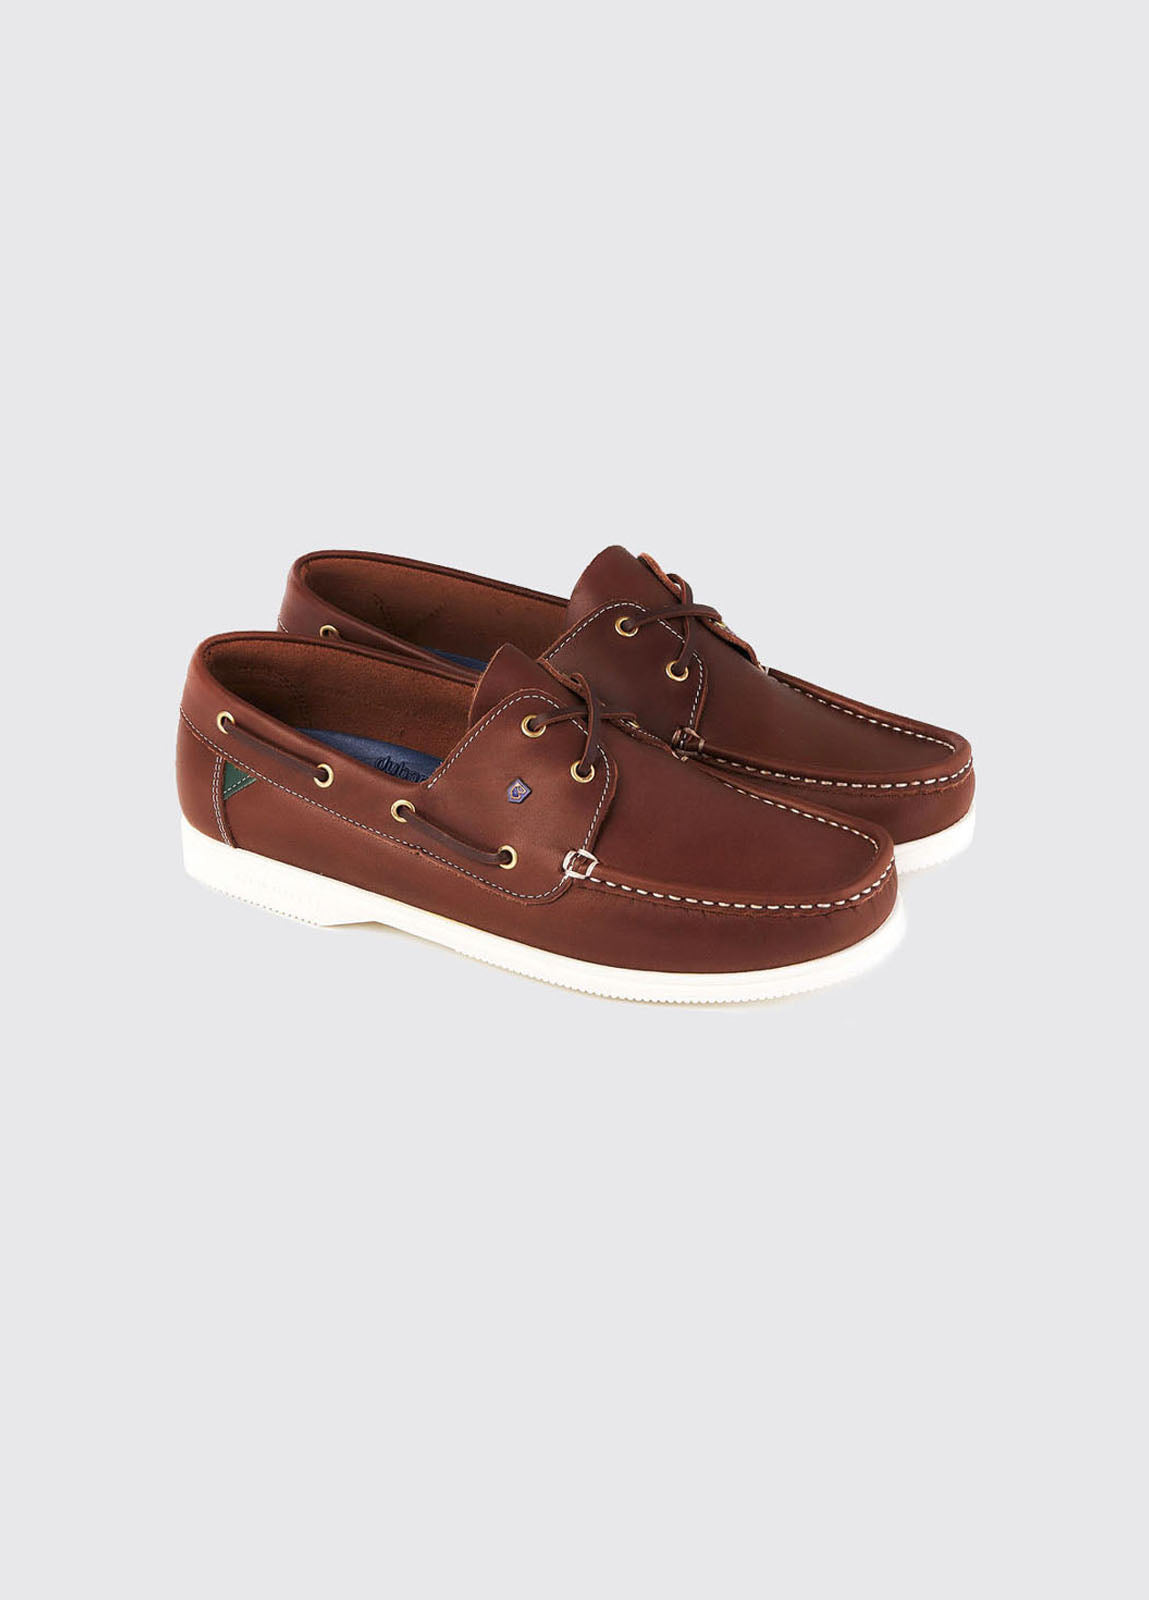 Dubarry Deck Shoes: High-Quality Brown School Shoes